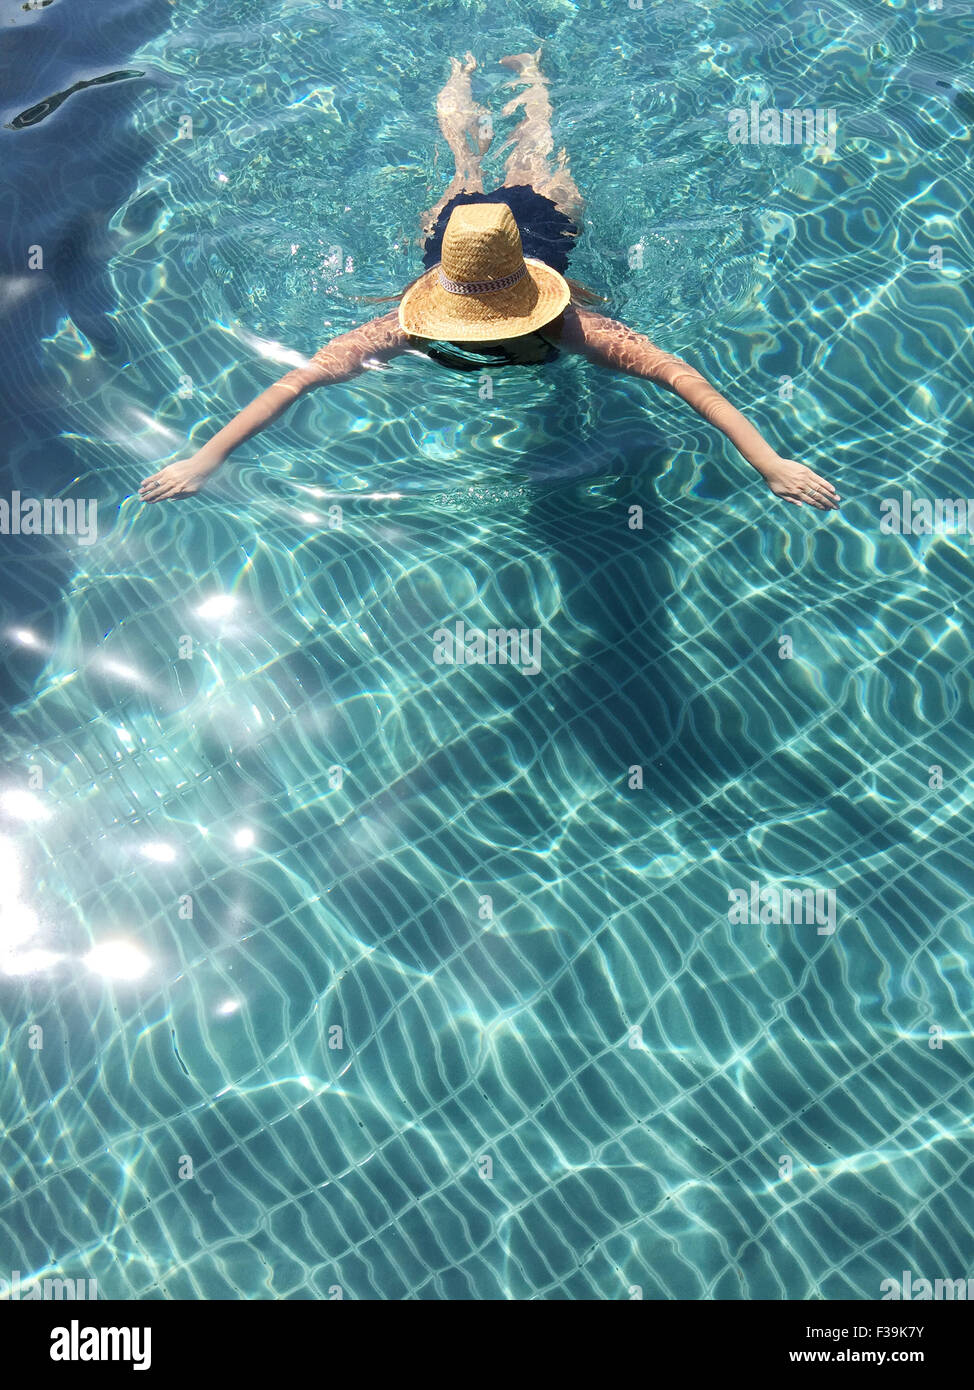 Woman wearing a straw hat swimming in a swimming pool, Thailand Stock Photo